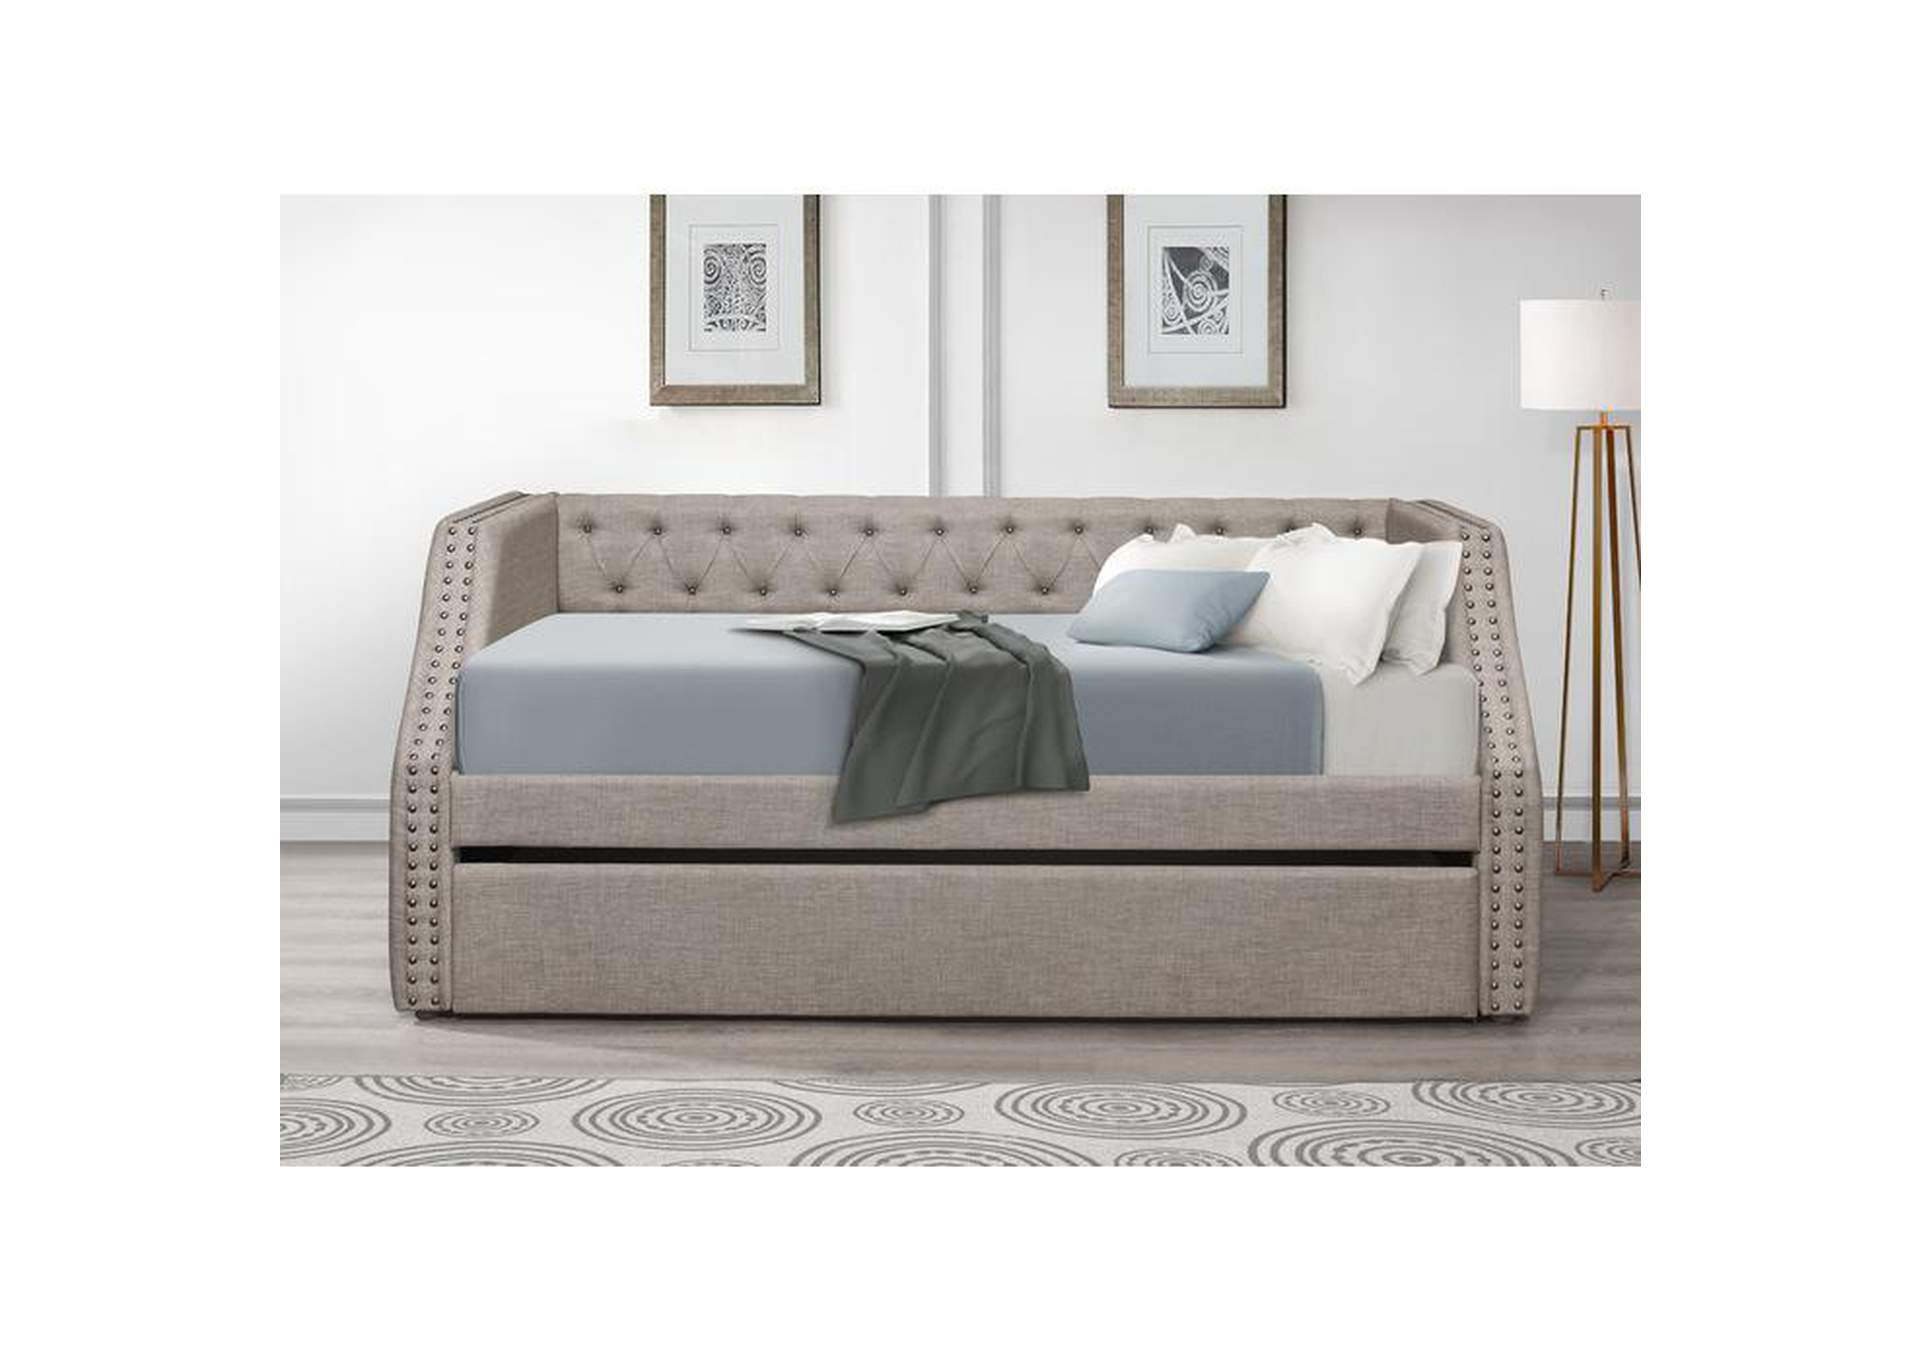 Berwick (2) Daybed with Trundle,Homelegance